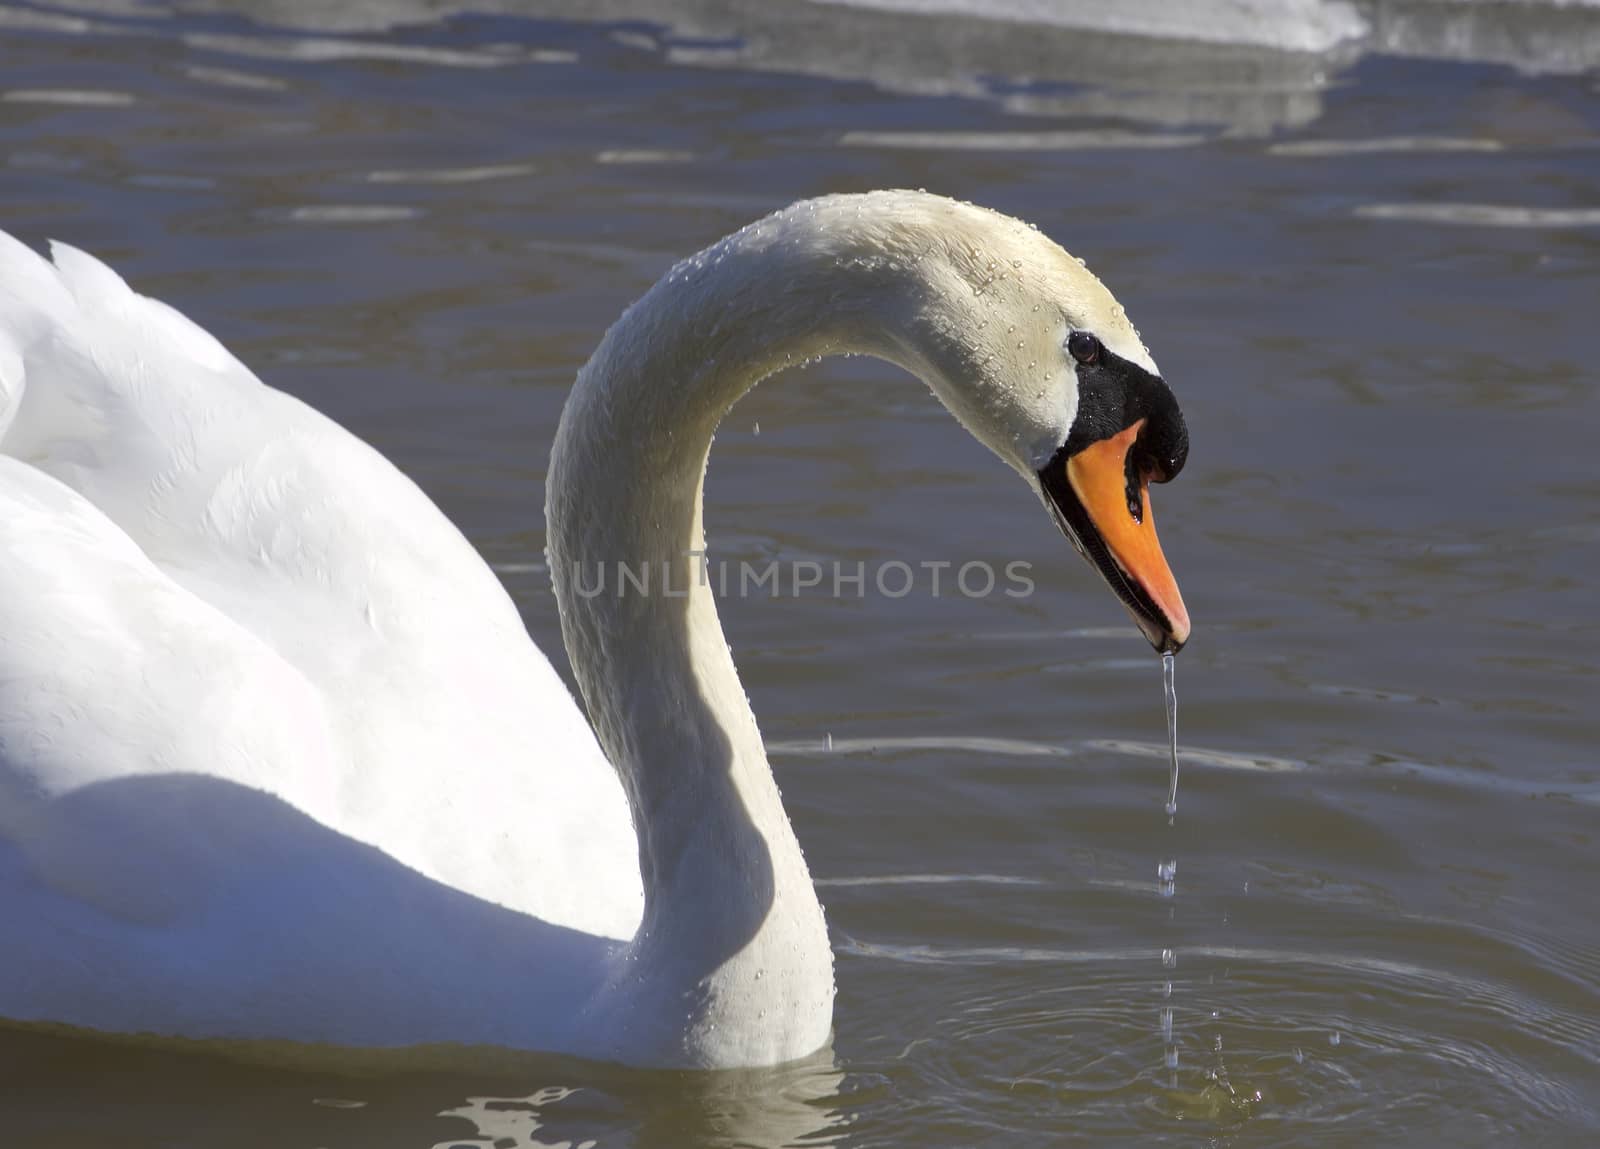 The swan is drinking the water